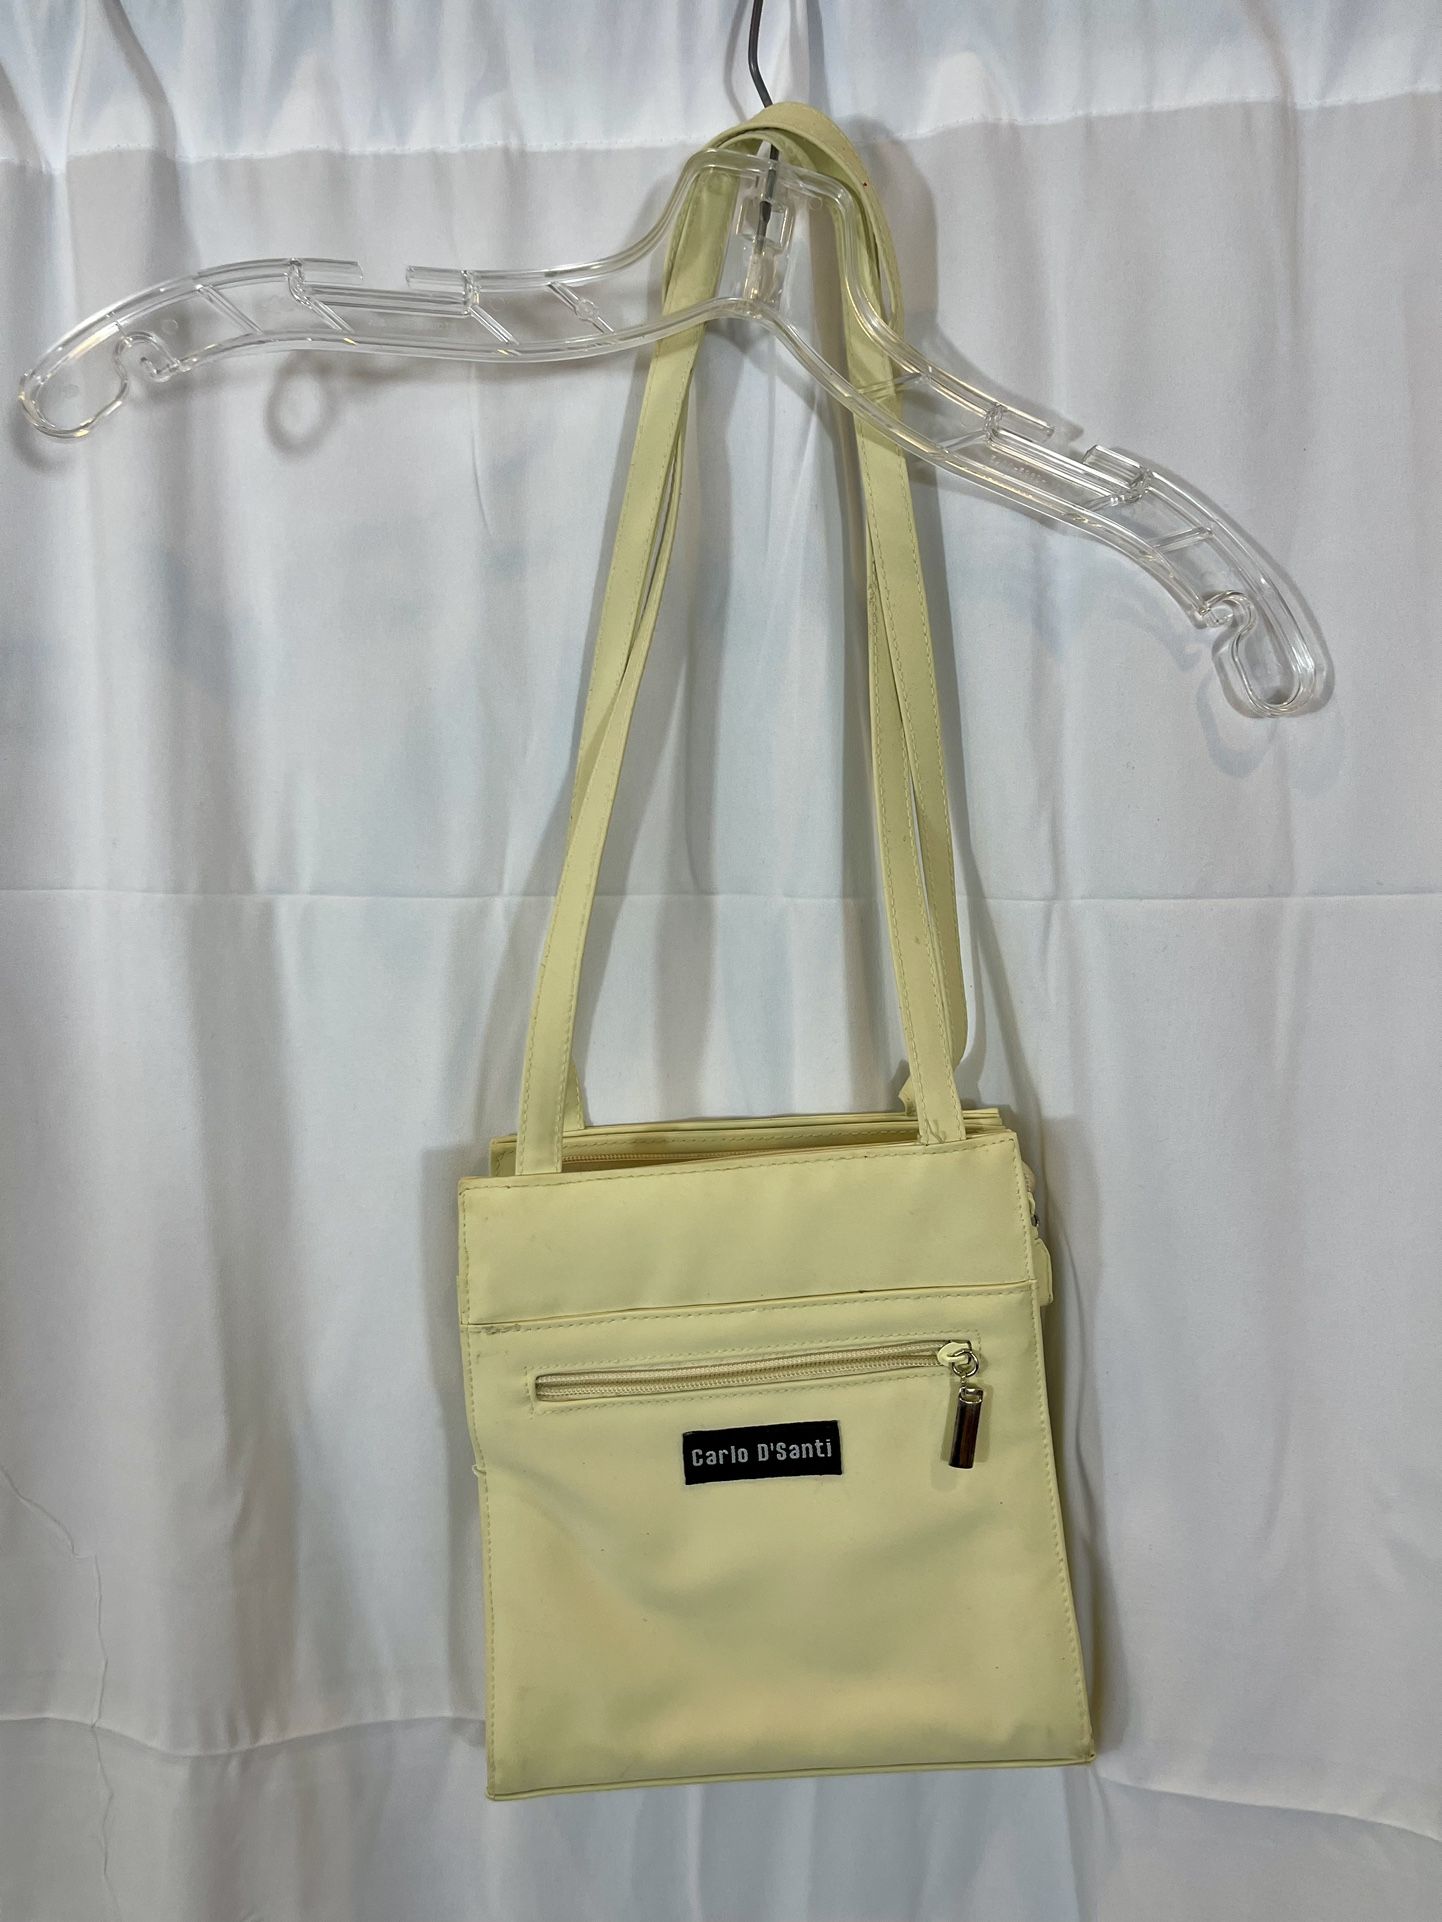 New Carlo D’Santi Cream Shoulder Bag With Attached Coin Purse